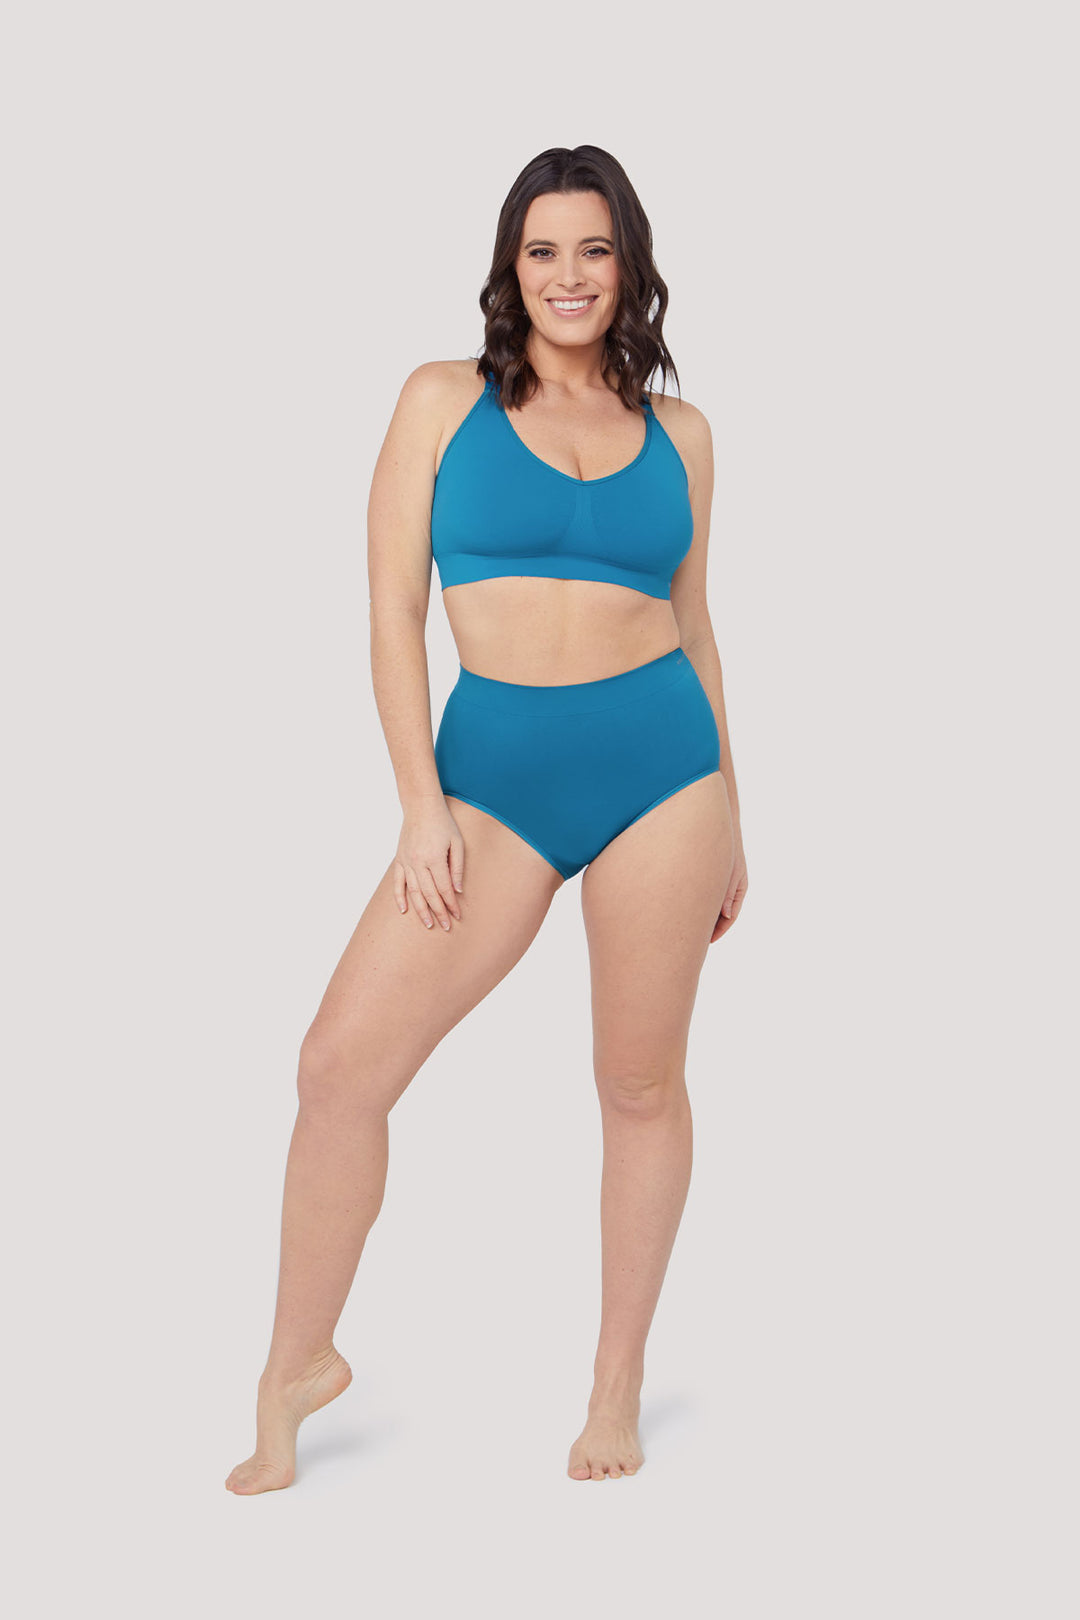 Women's super soft and stretchy, high waist, full coverage underwear 3 pack | Bella Bodies UK | Blue Teal